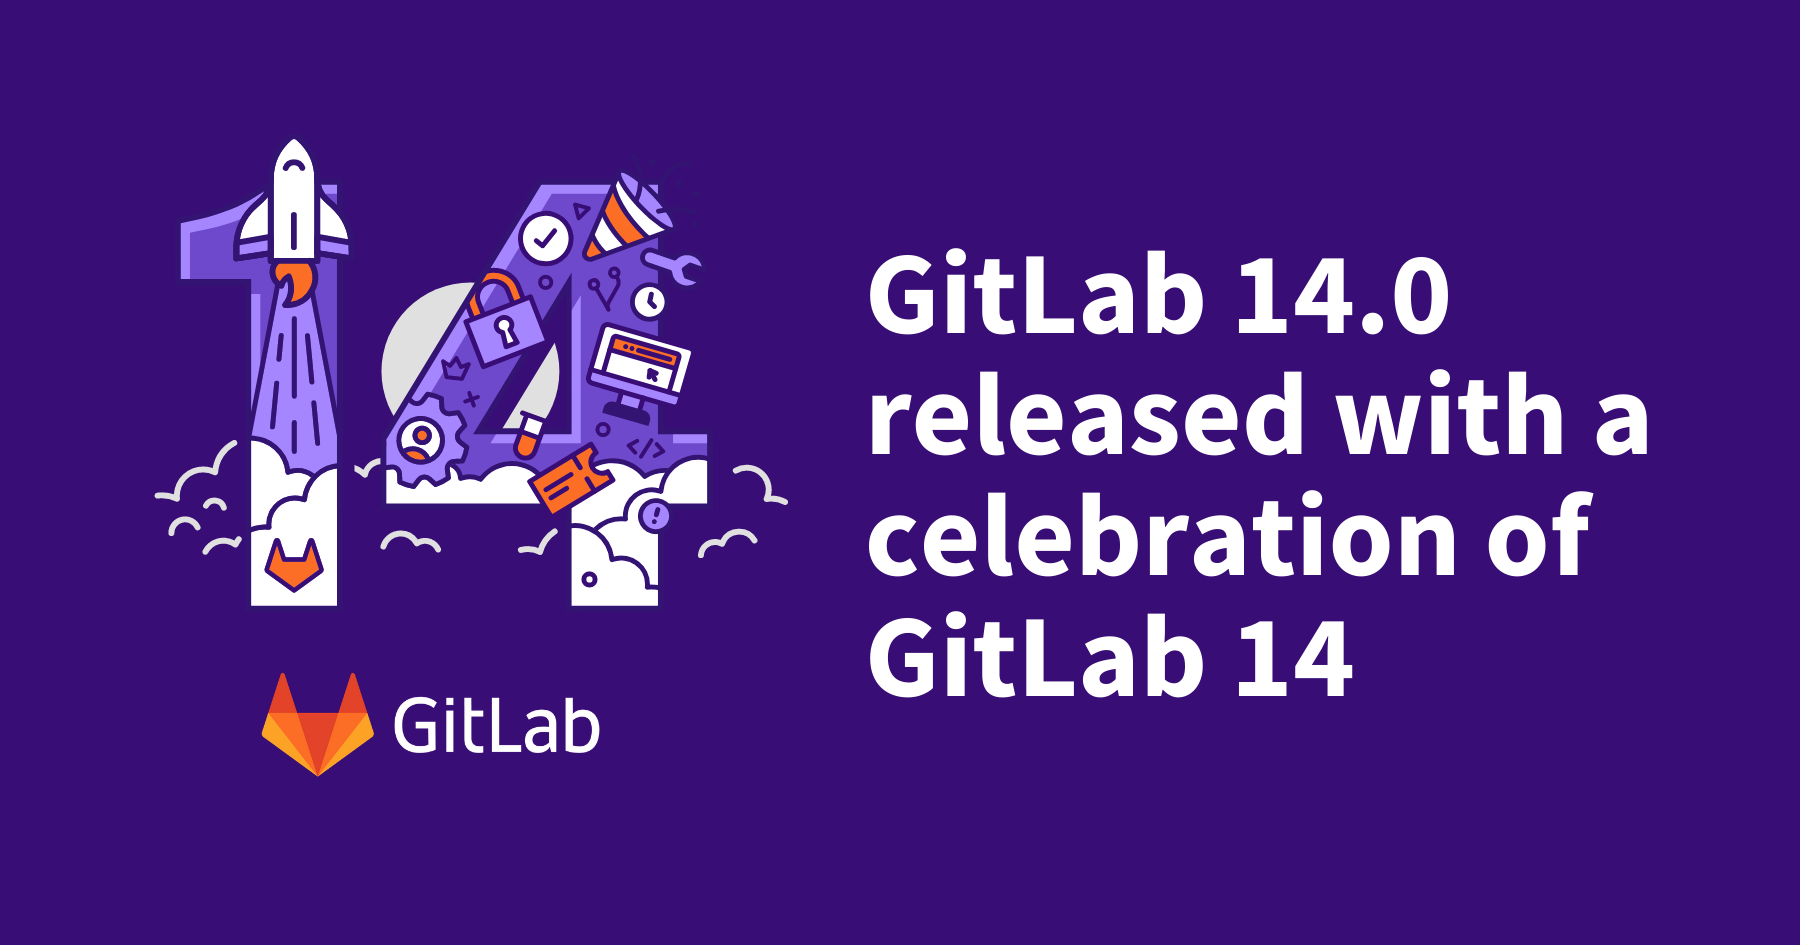 When we think of everything released in the year since GitLab 13.0, we could not be more proud of our community and our team. This month, we celebrate